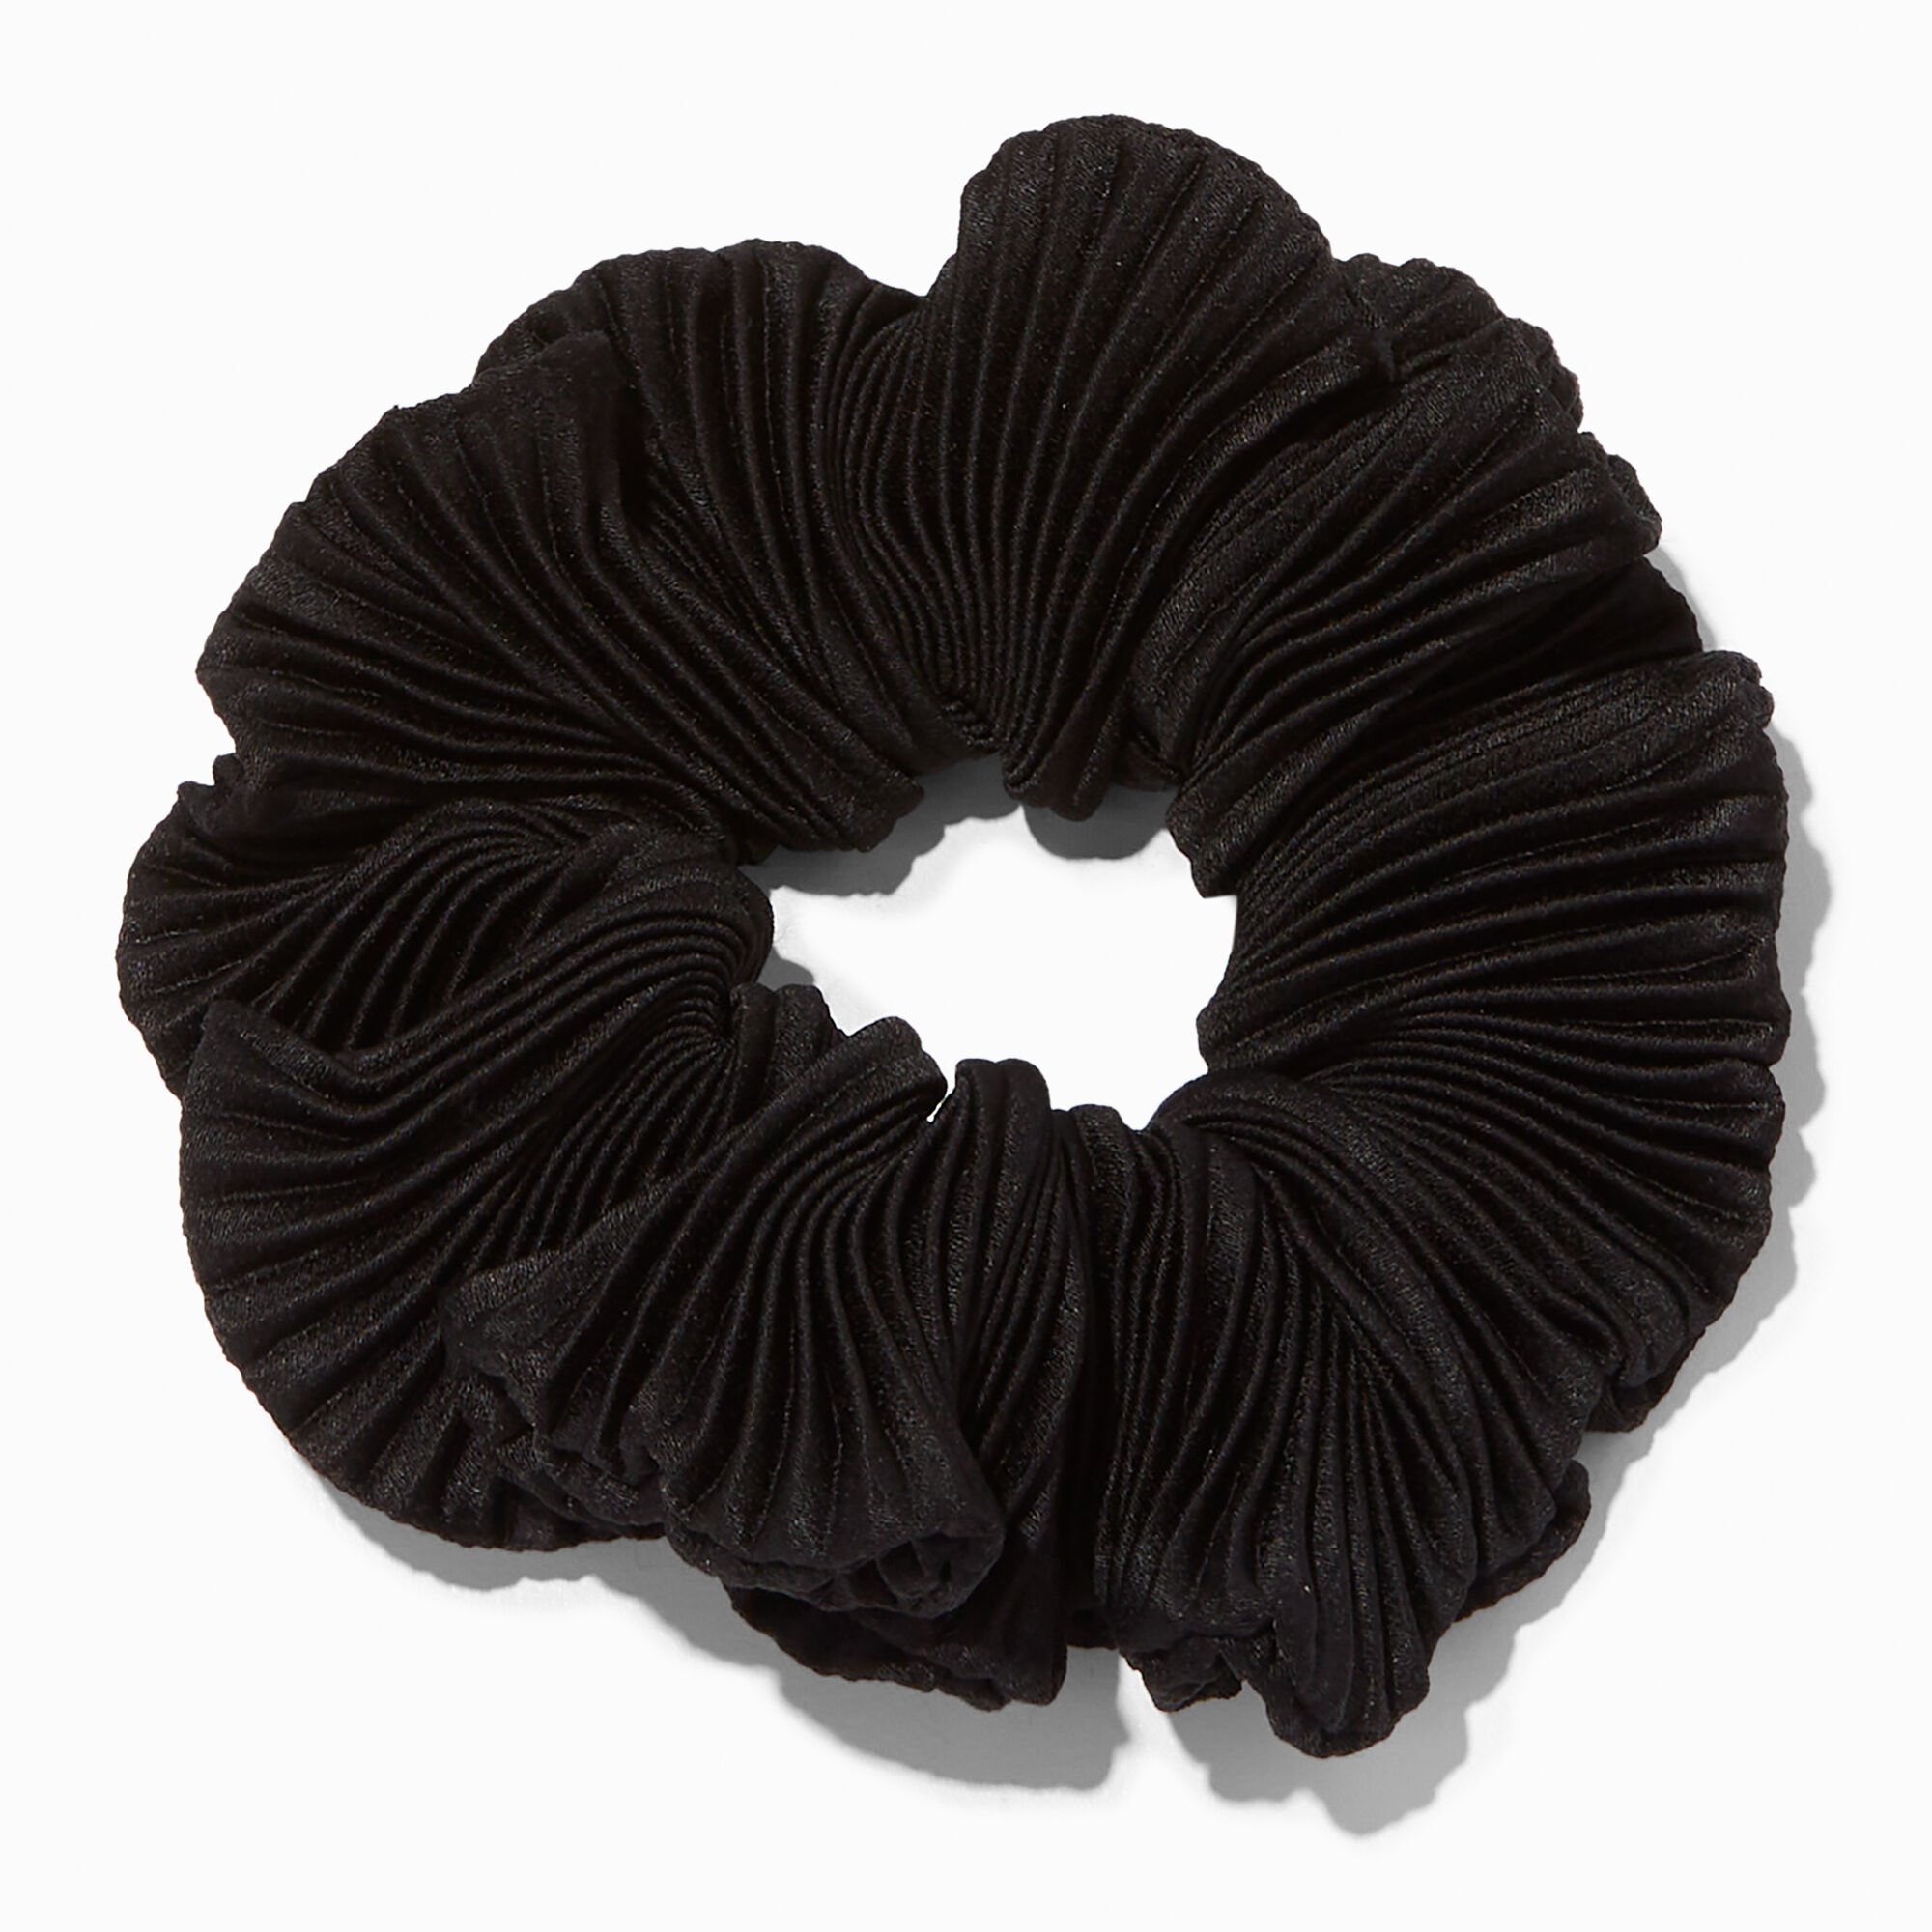 View Claires Pleated Hair Scrunchie Black information